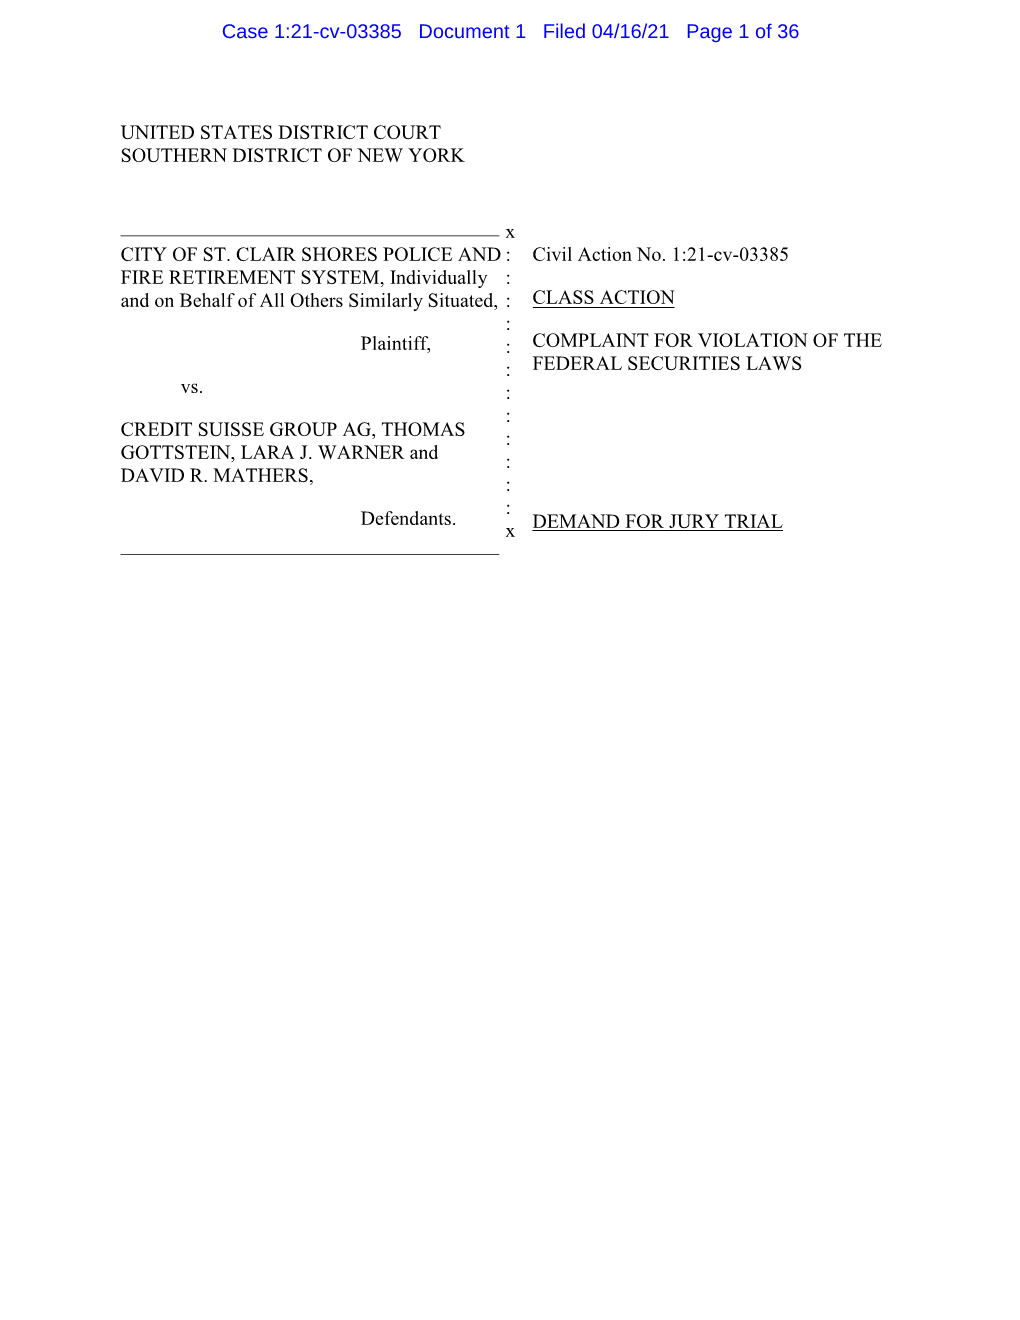 Case 1:21-Cv-03385 Document 1 Filed 04/16/21 Page 1 of 36